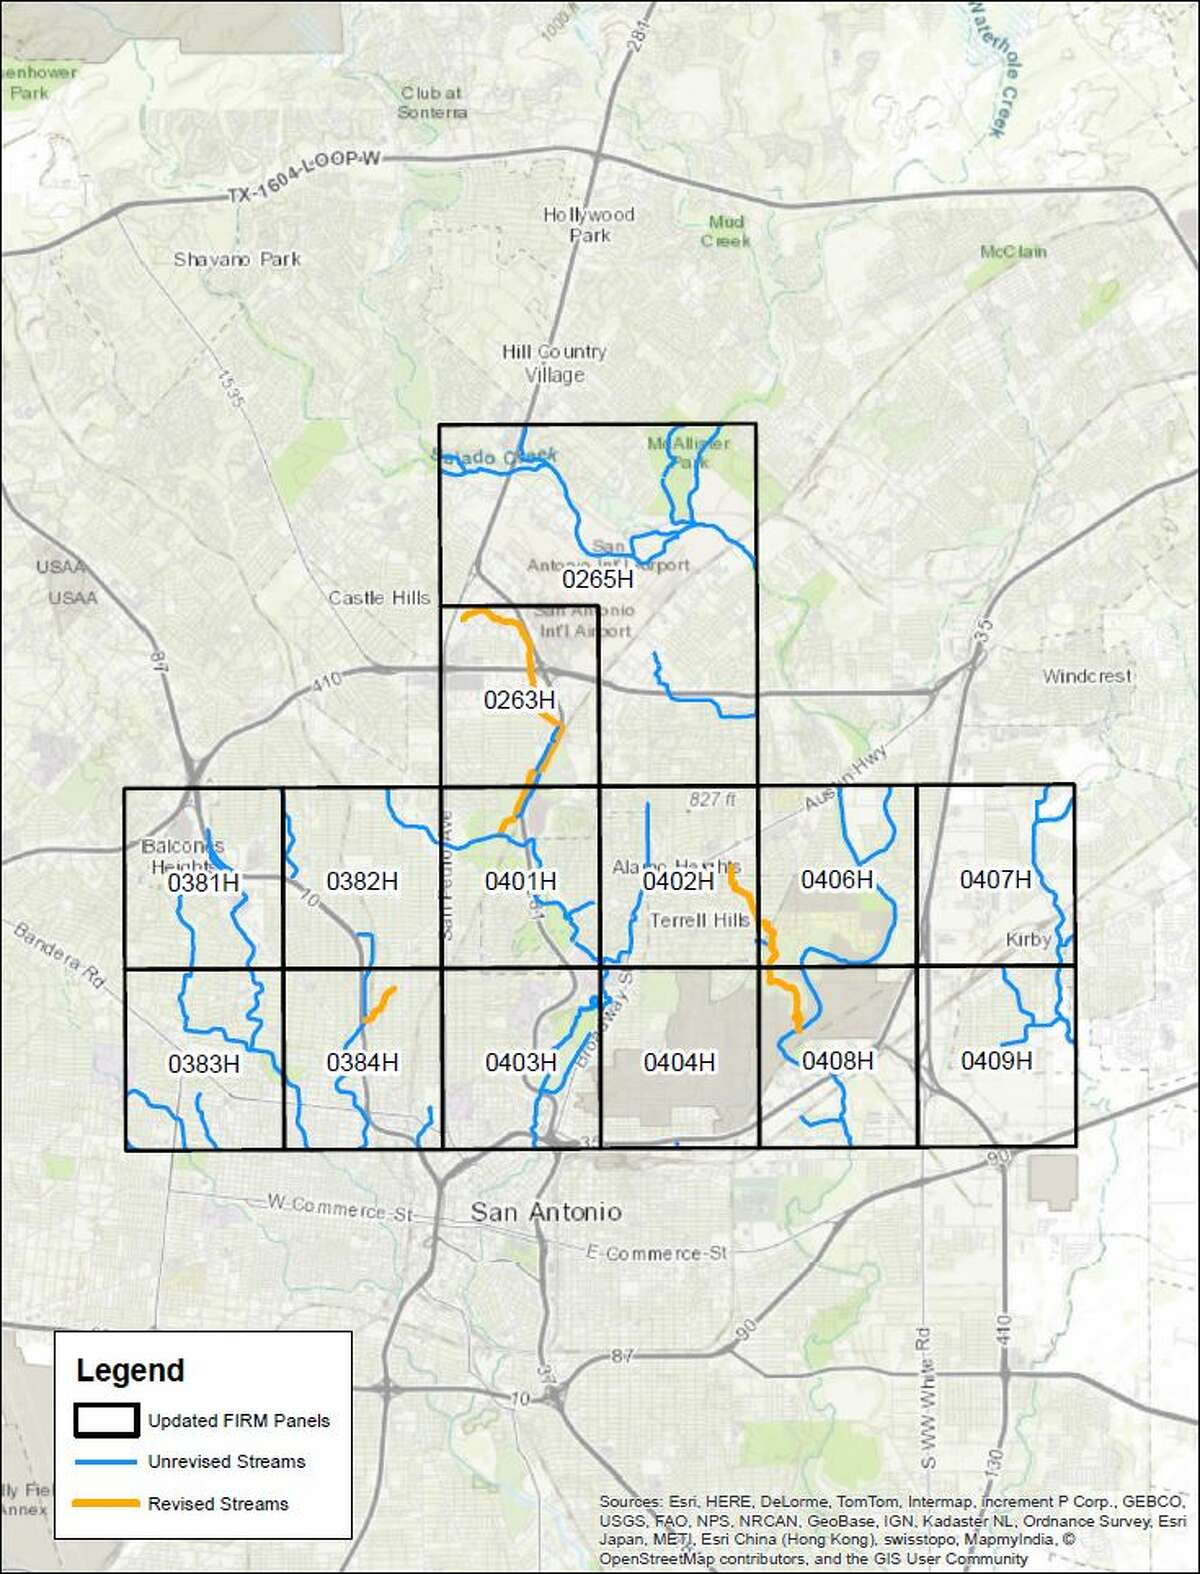 Houston Texas Flood Zones Map 2019 / Study Finds Fema Flood Maps Missed 75 Of Houston Flood Damage Claims Between 1999 And 2009 - The texas medical center was essentially shut down due to the storm.